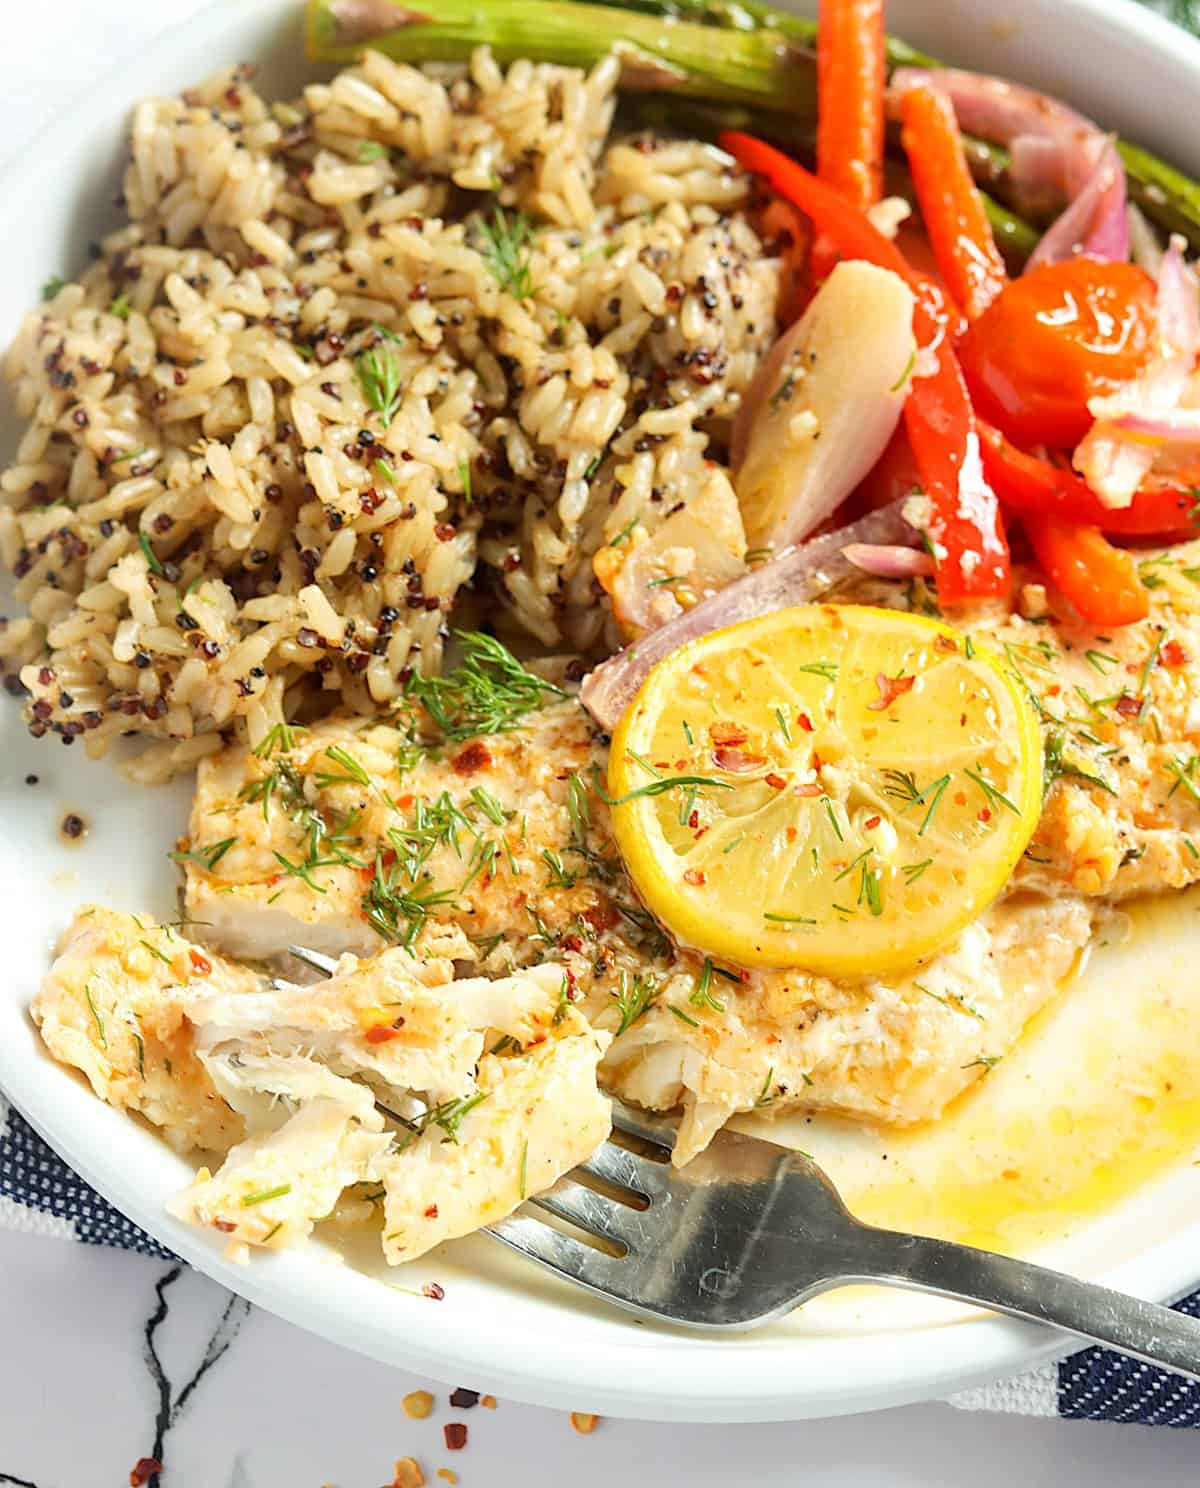 Baked Rockfish with seasoned rice, lemon slices, and delicious roasted vegetables for a complete meal